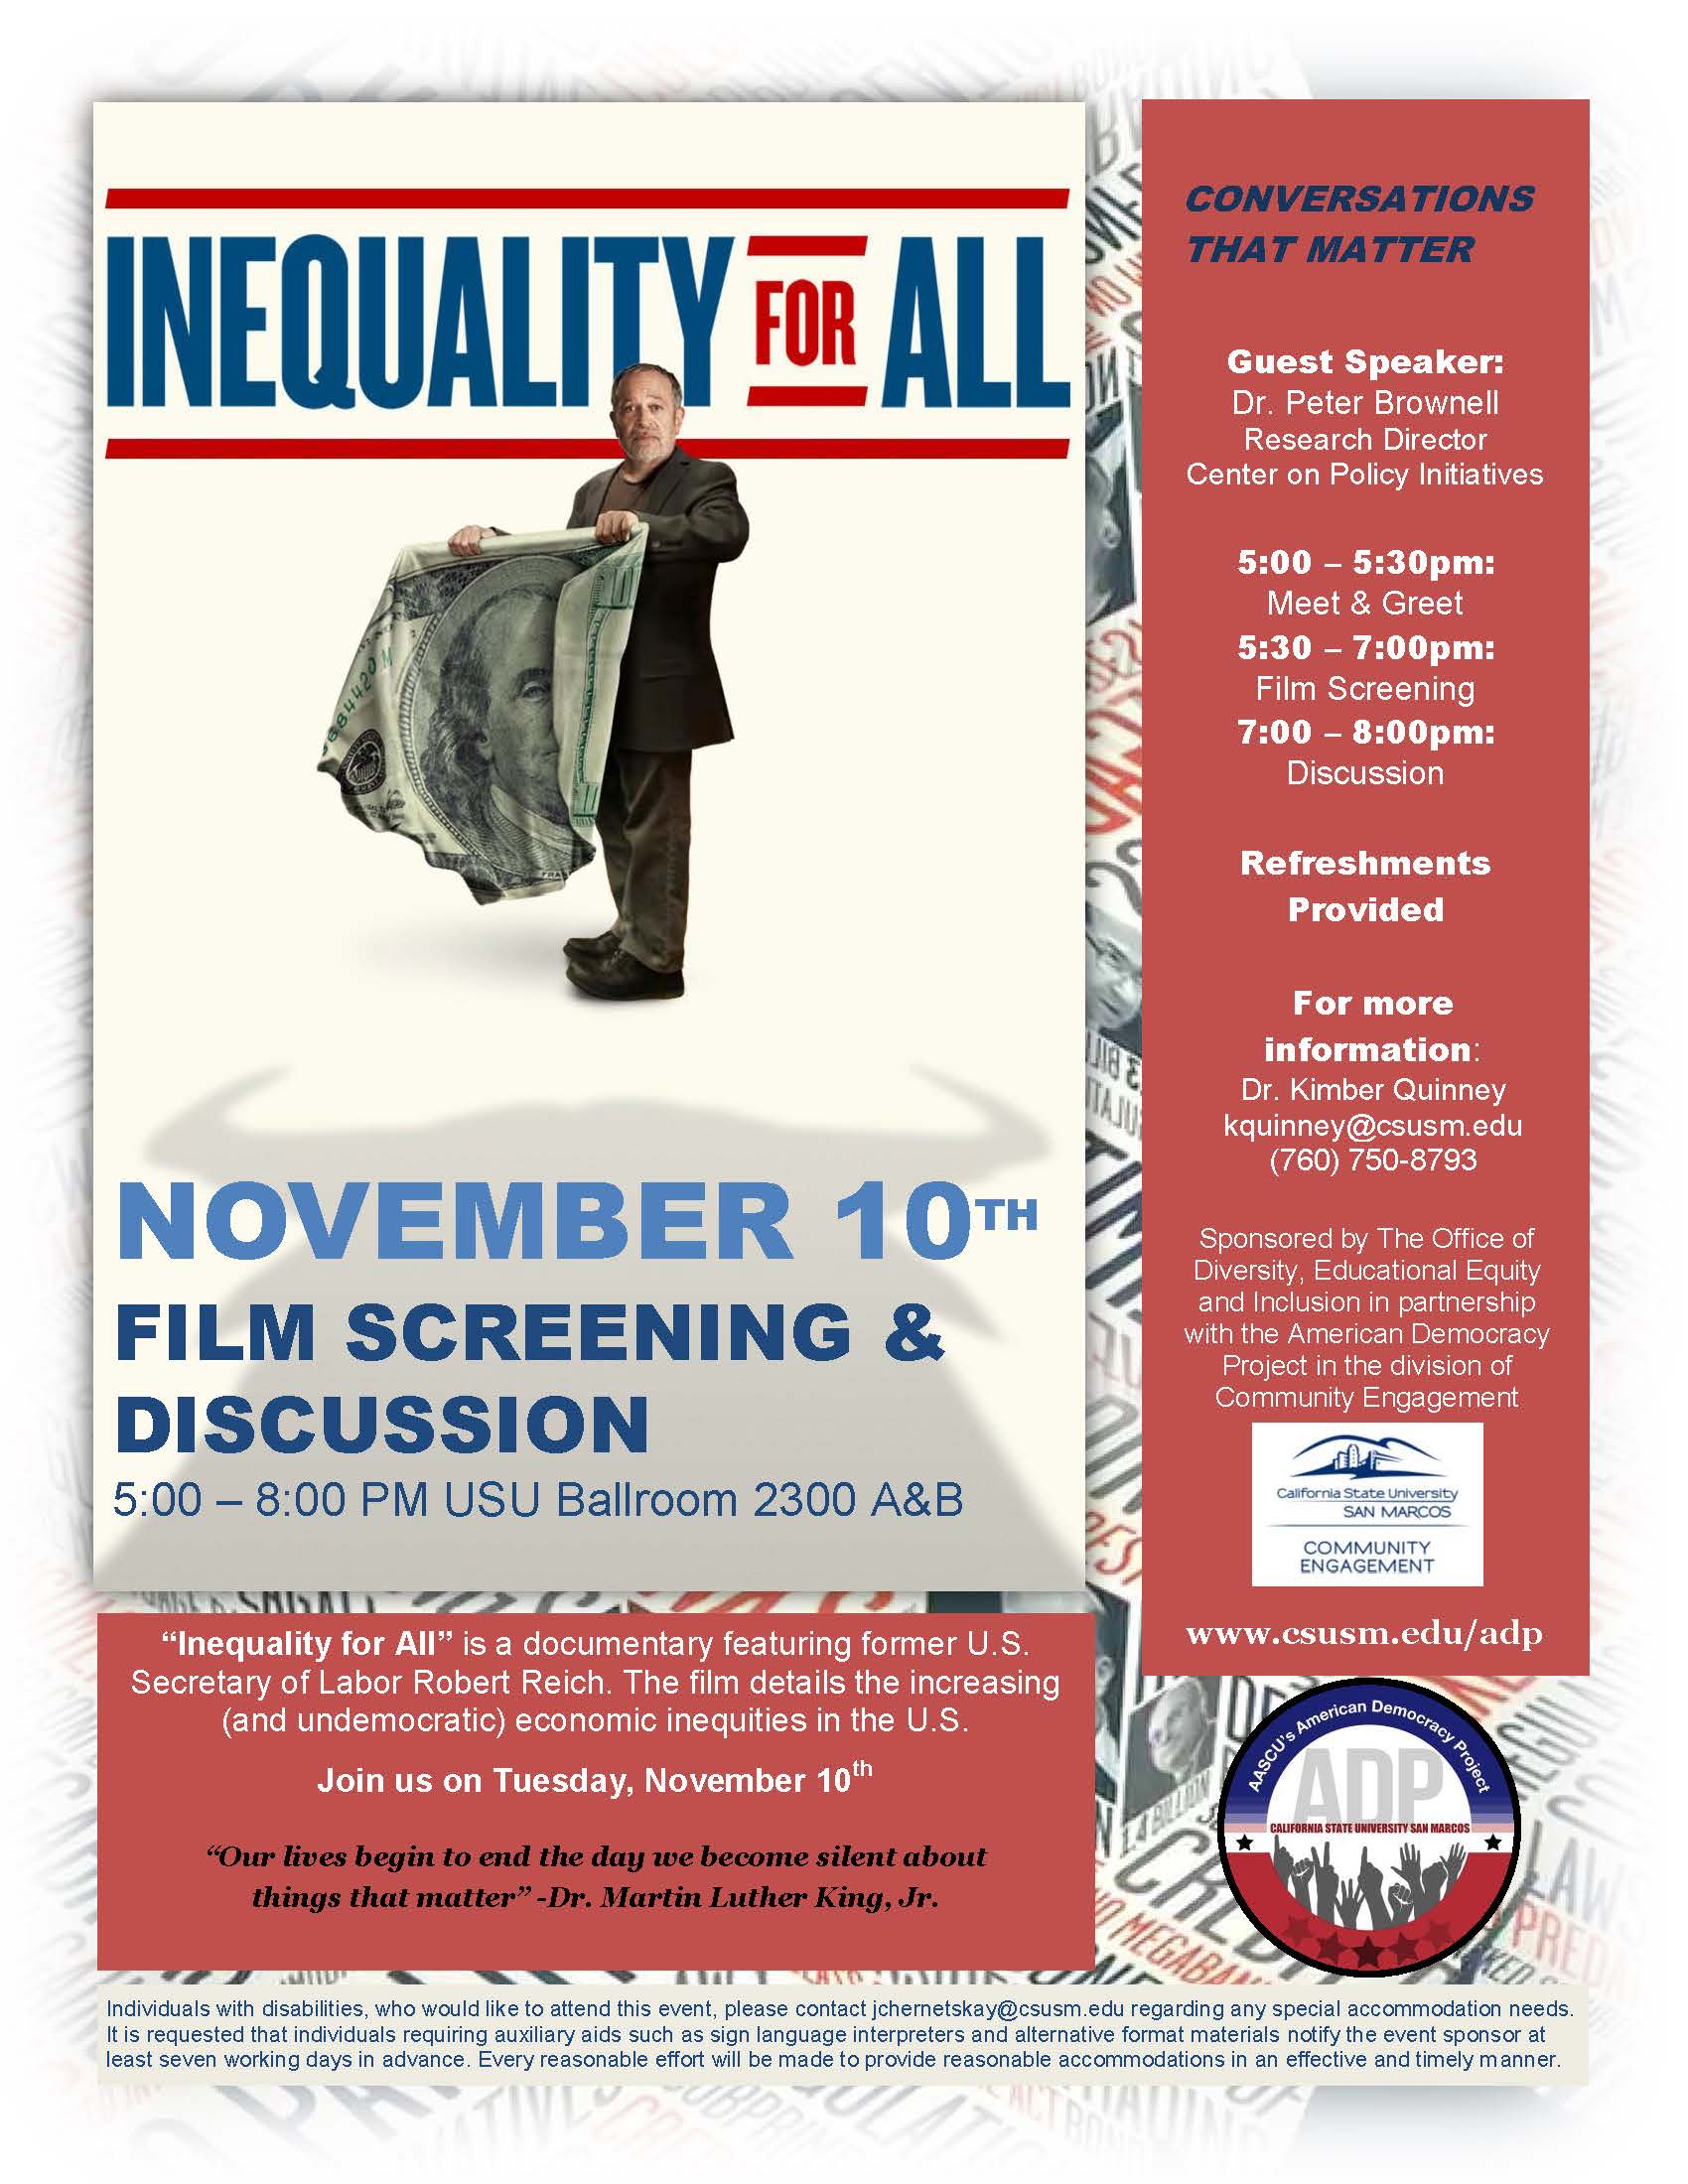 Inequality for all flyer